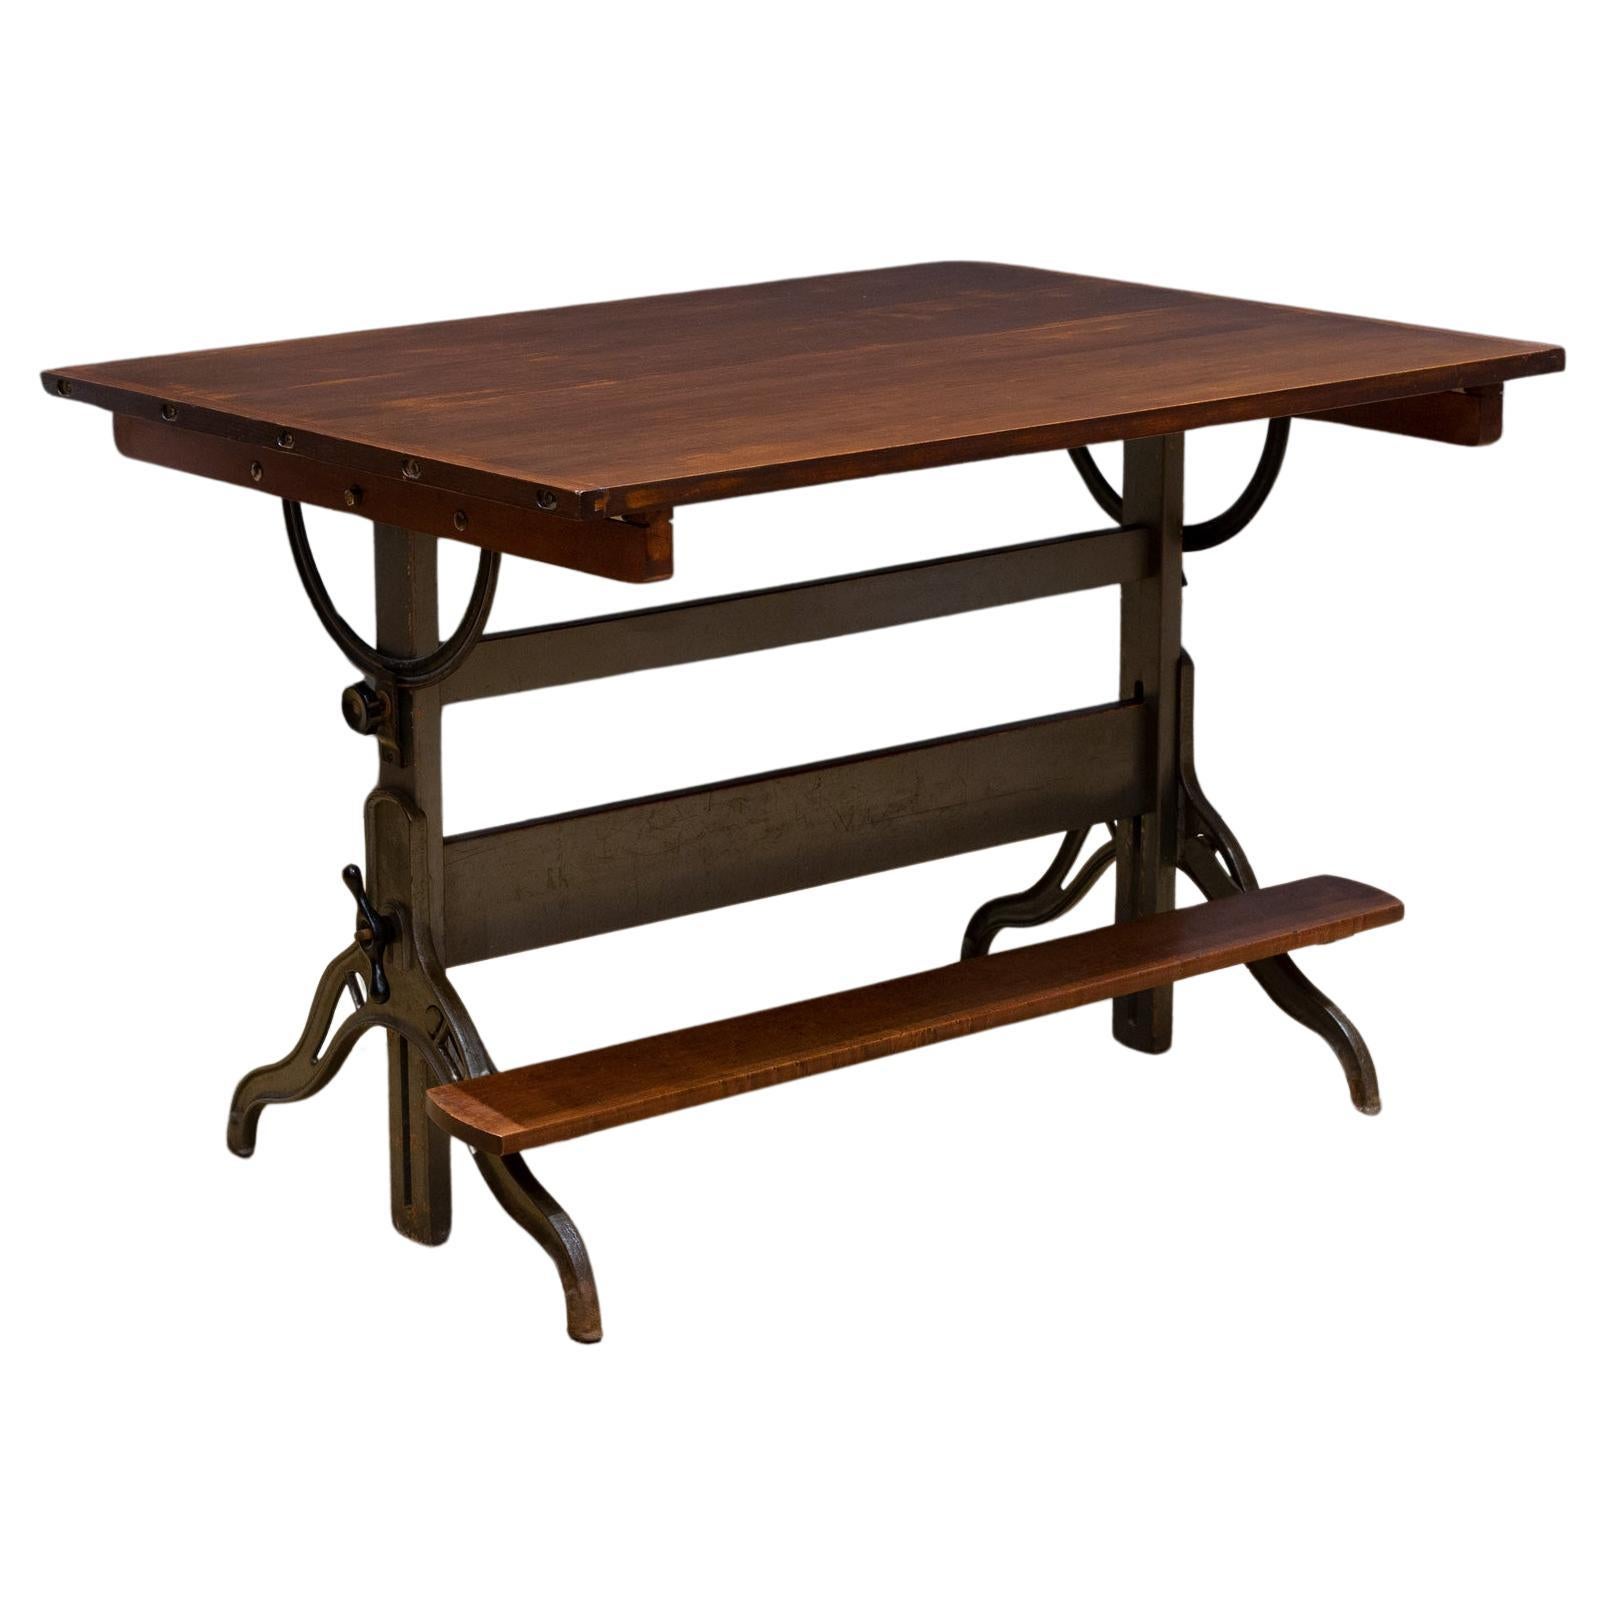 Antique Hamilton Mfg. Co. Drafting Table with Footrest c.1930 For Sale